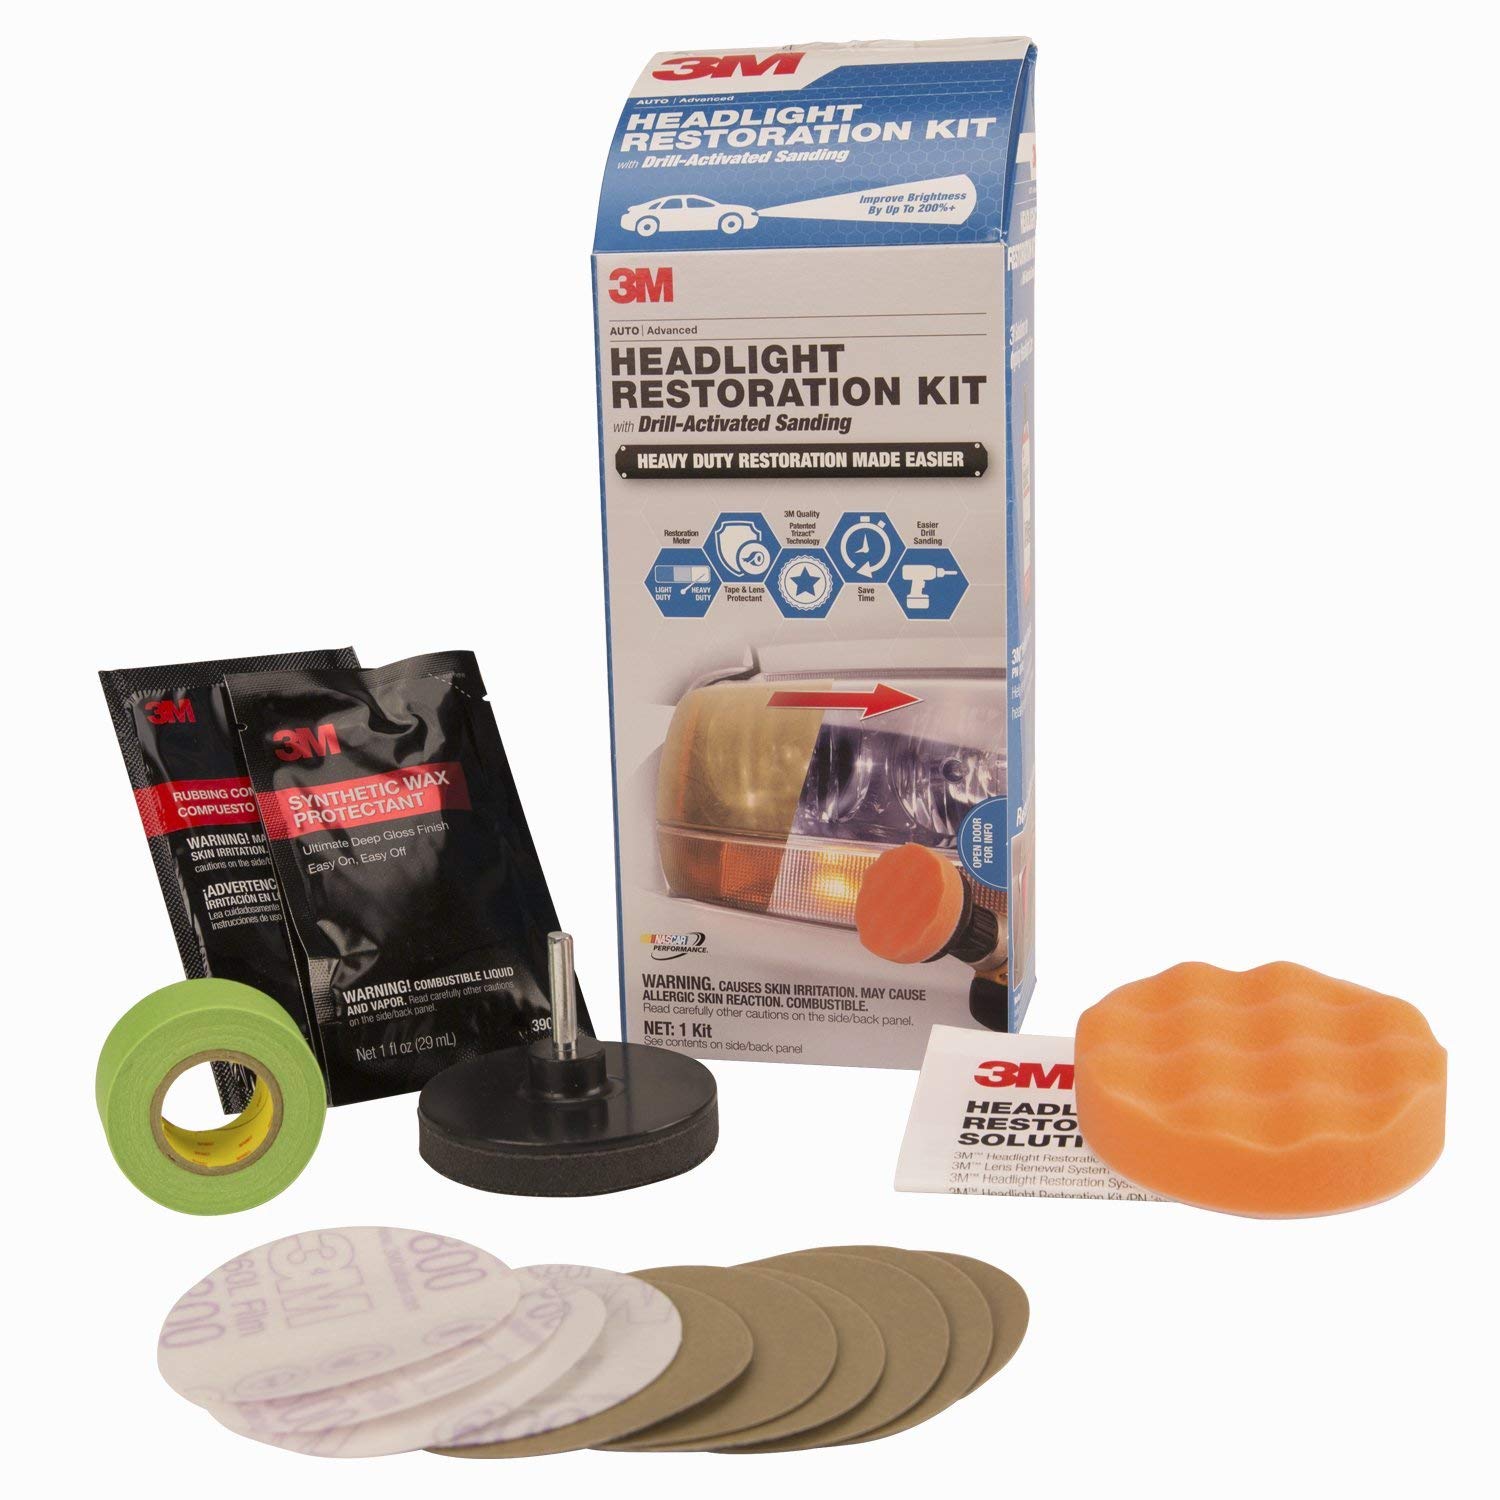 3M Headlight Restoration Kit Review Things You Need To Know